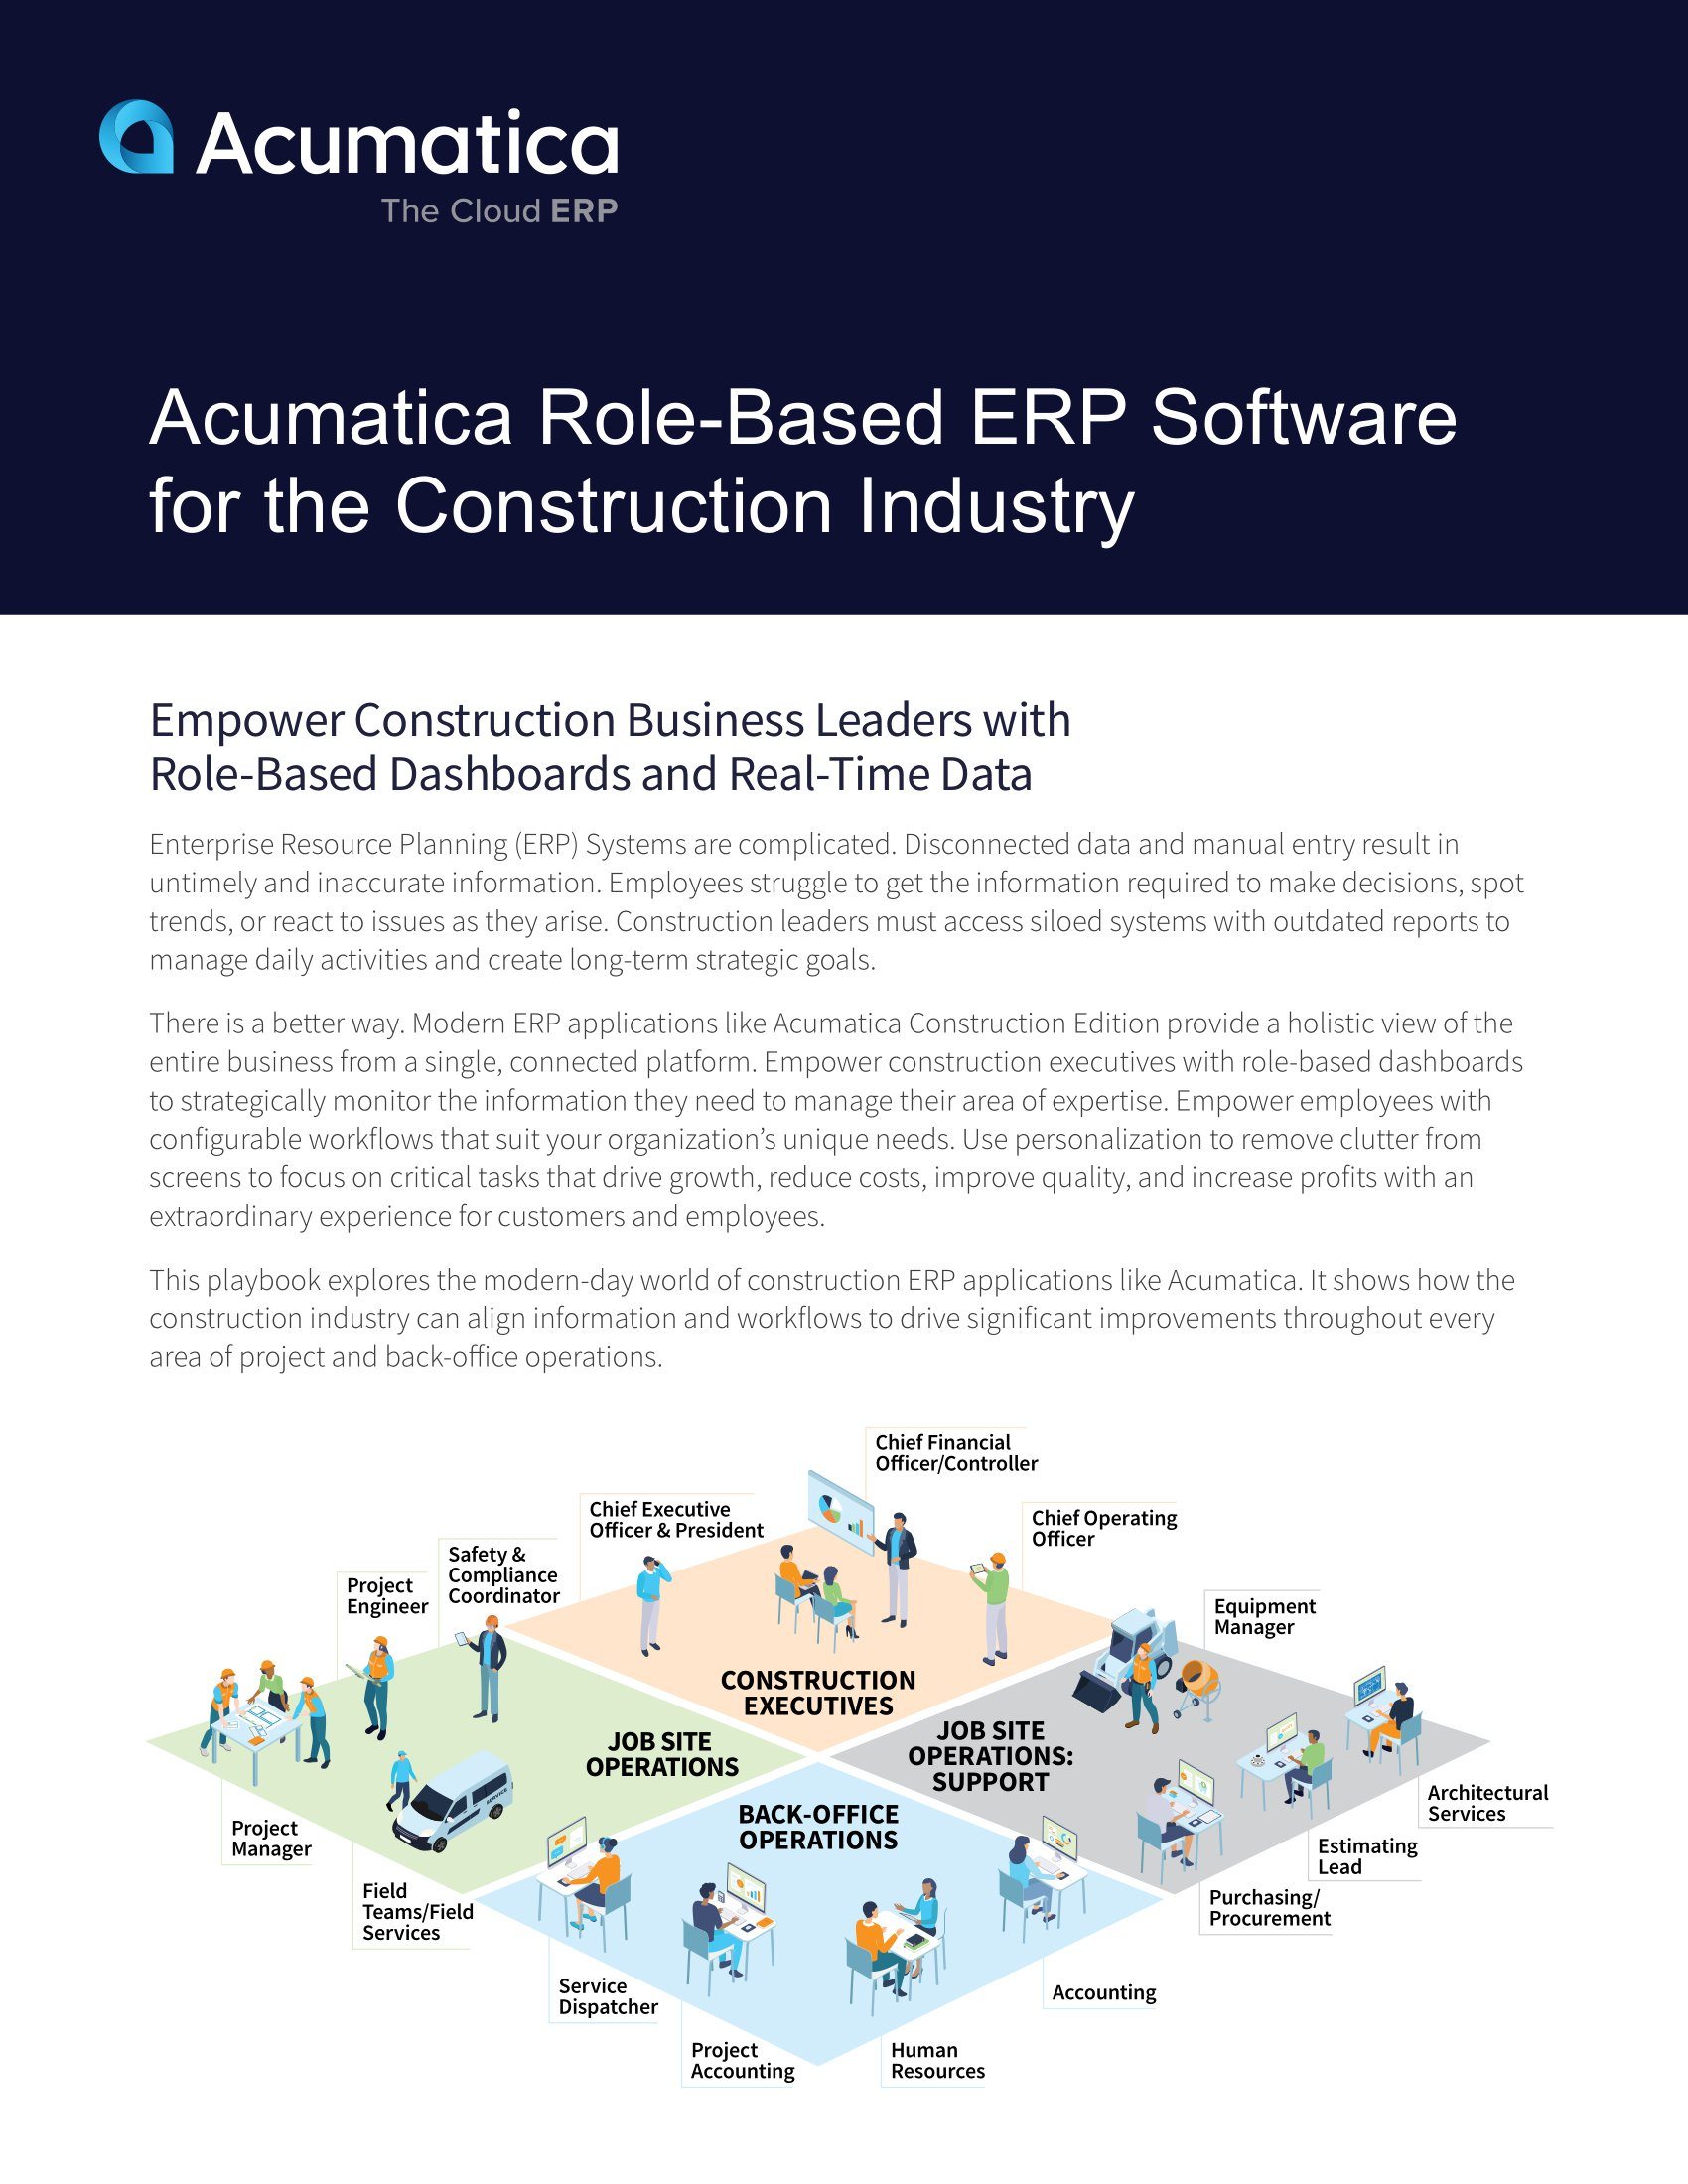 All Construction Roles, One Construction ERP Solution